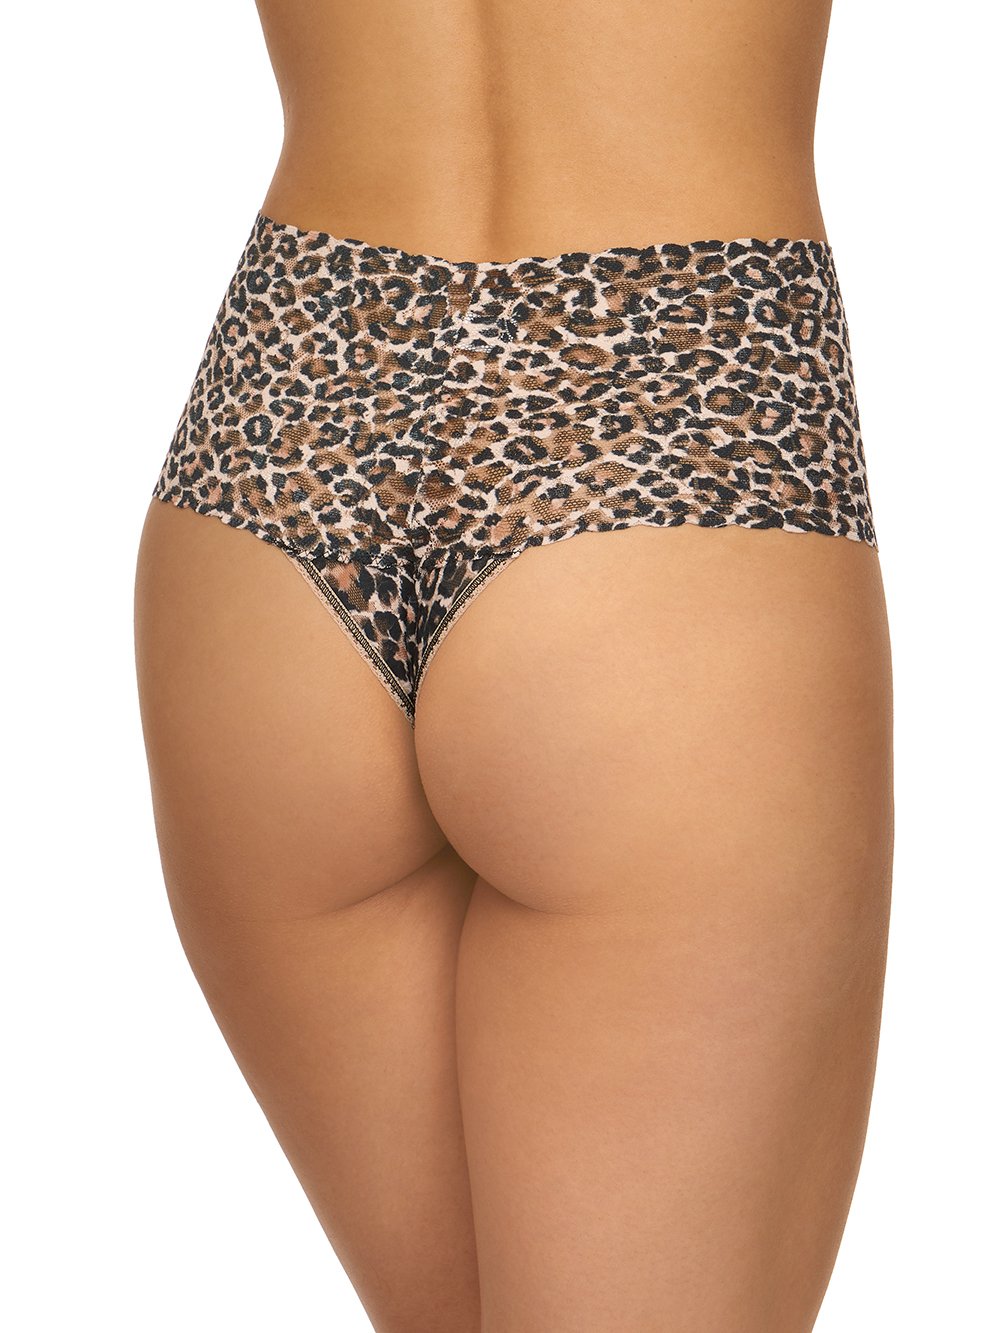 Hanky Panky Thong Brown Blk / One Size Rolled Classic Leopard Low Rise Thong